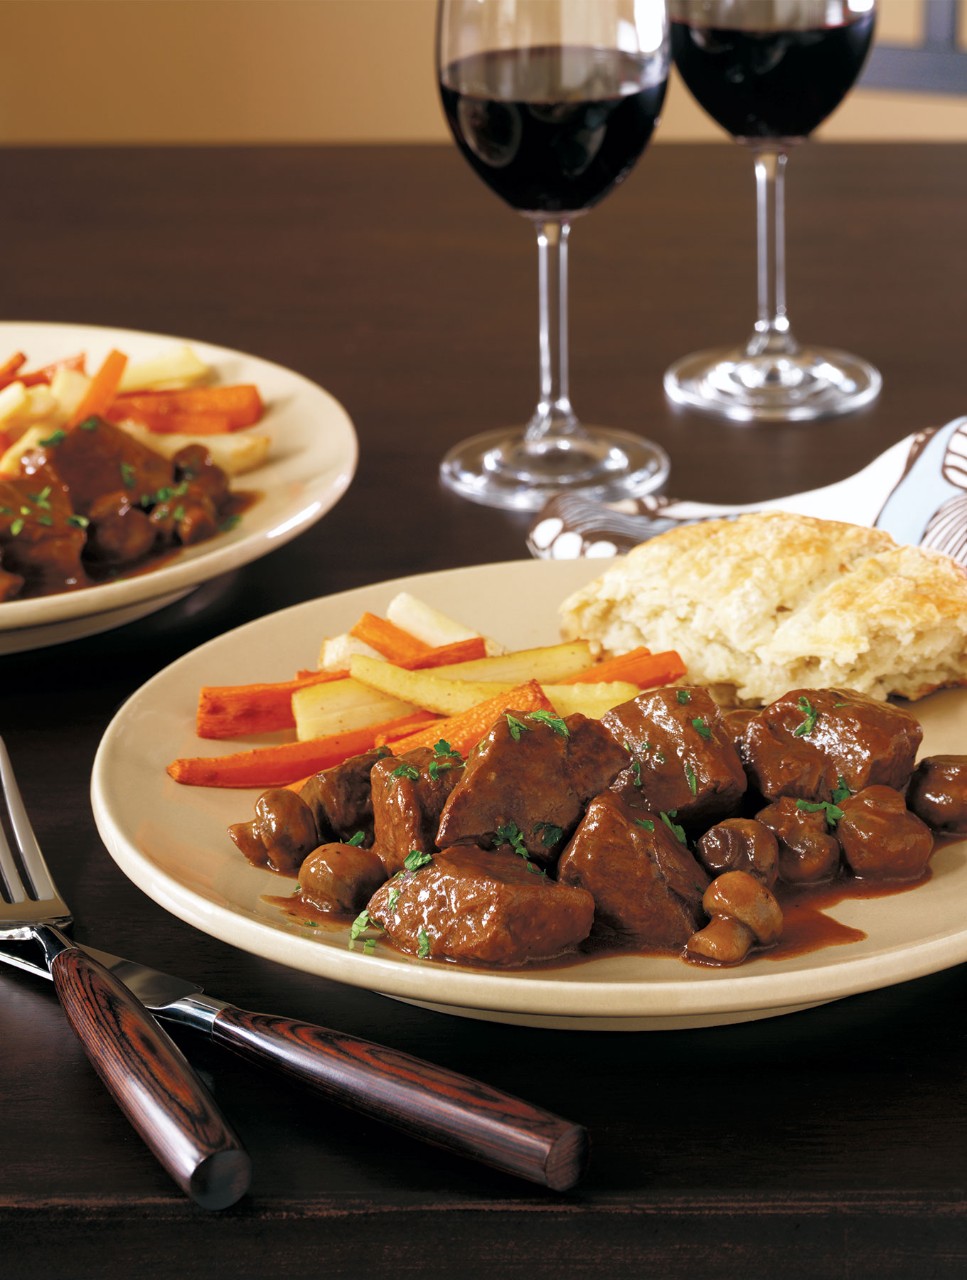 Beef with Cabernet Sauce